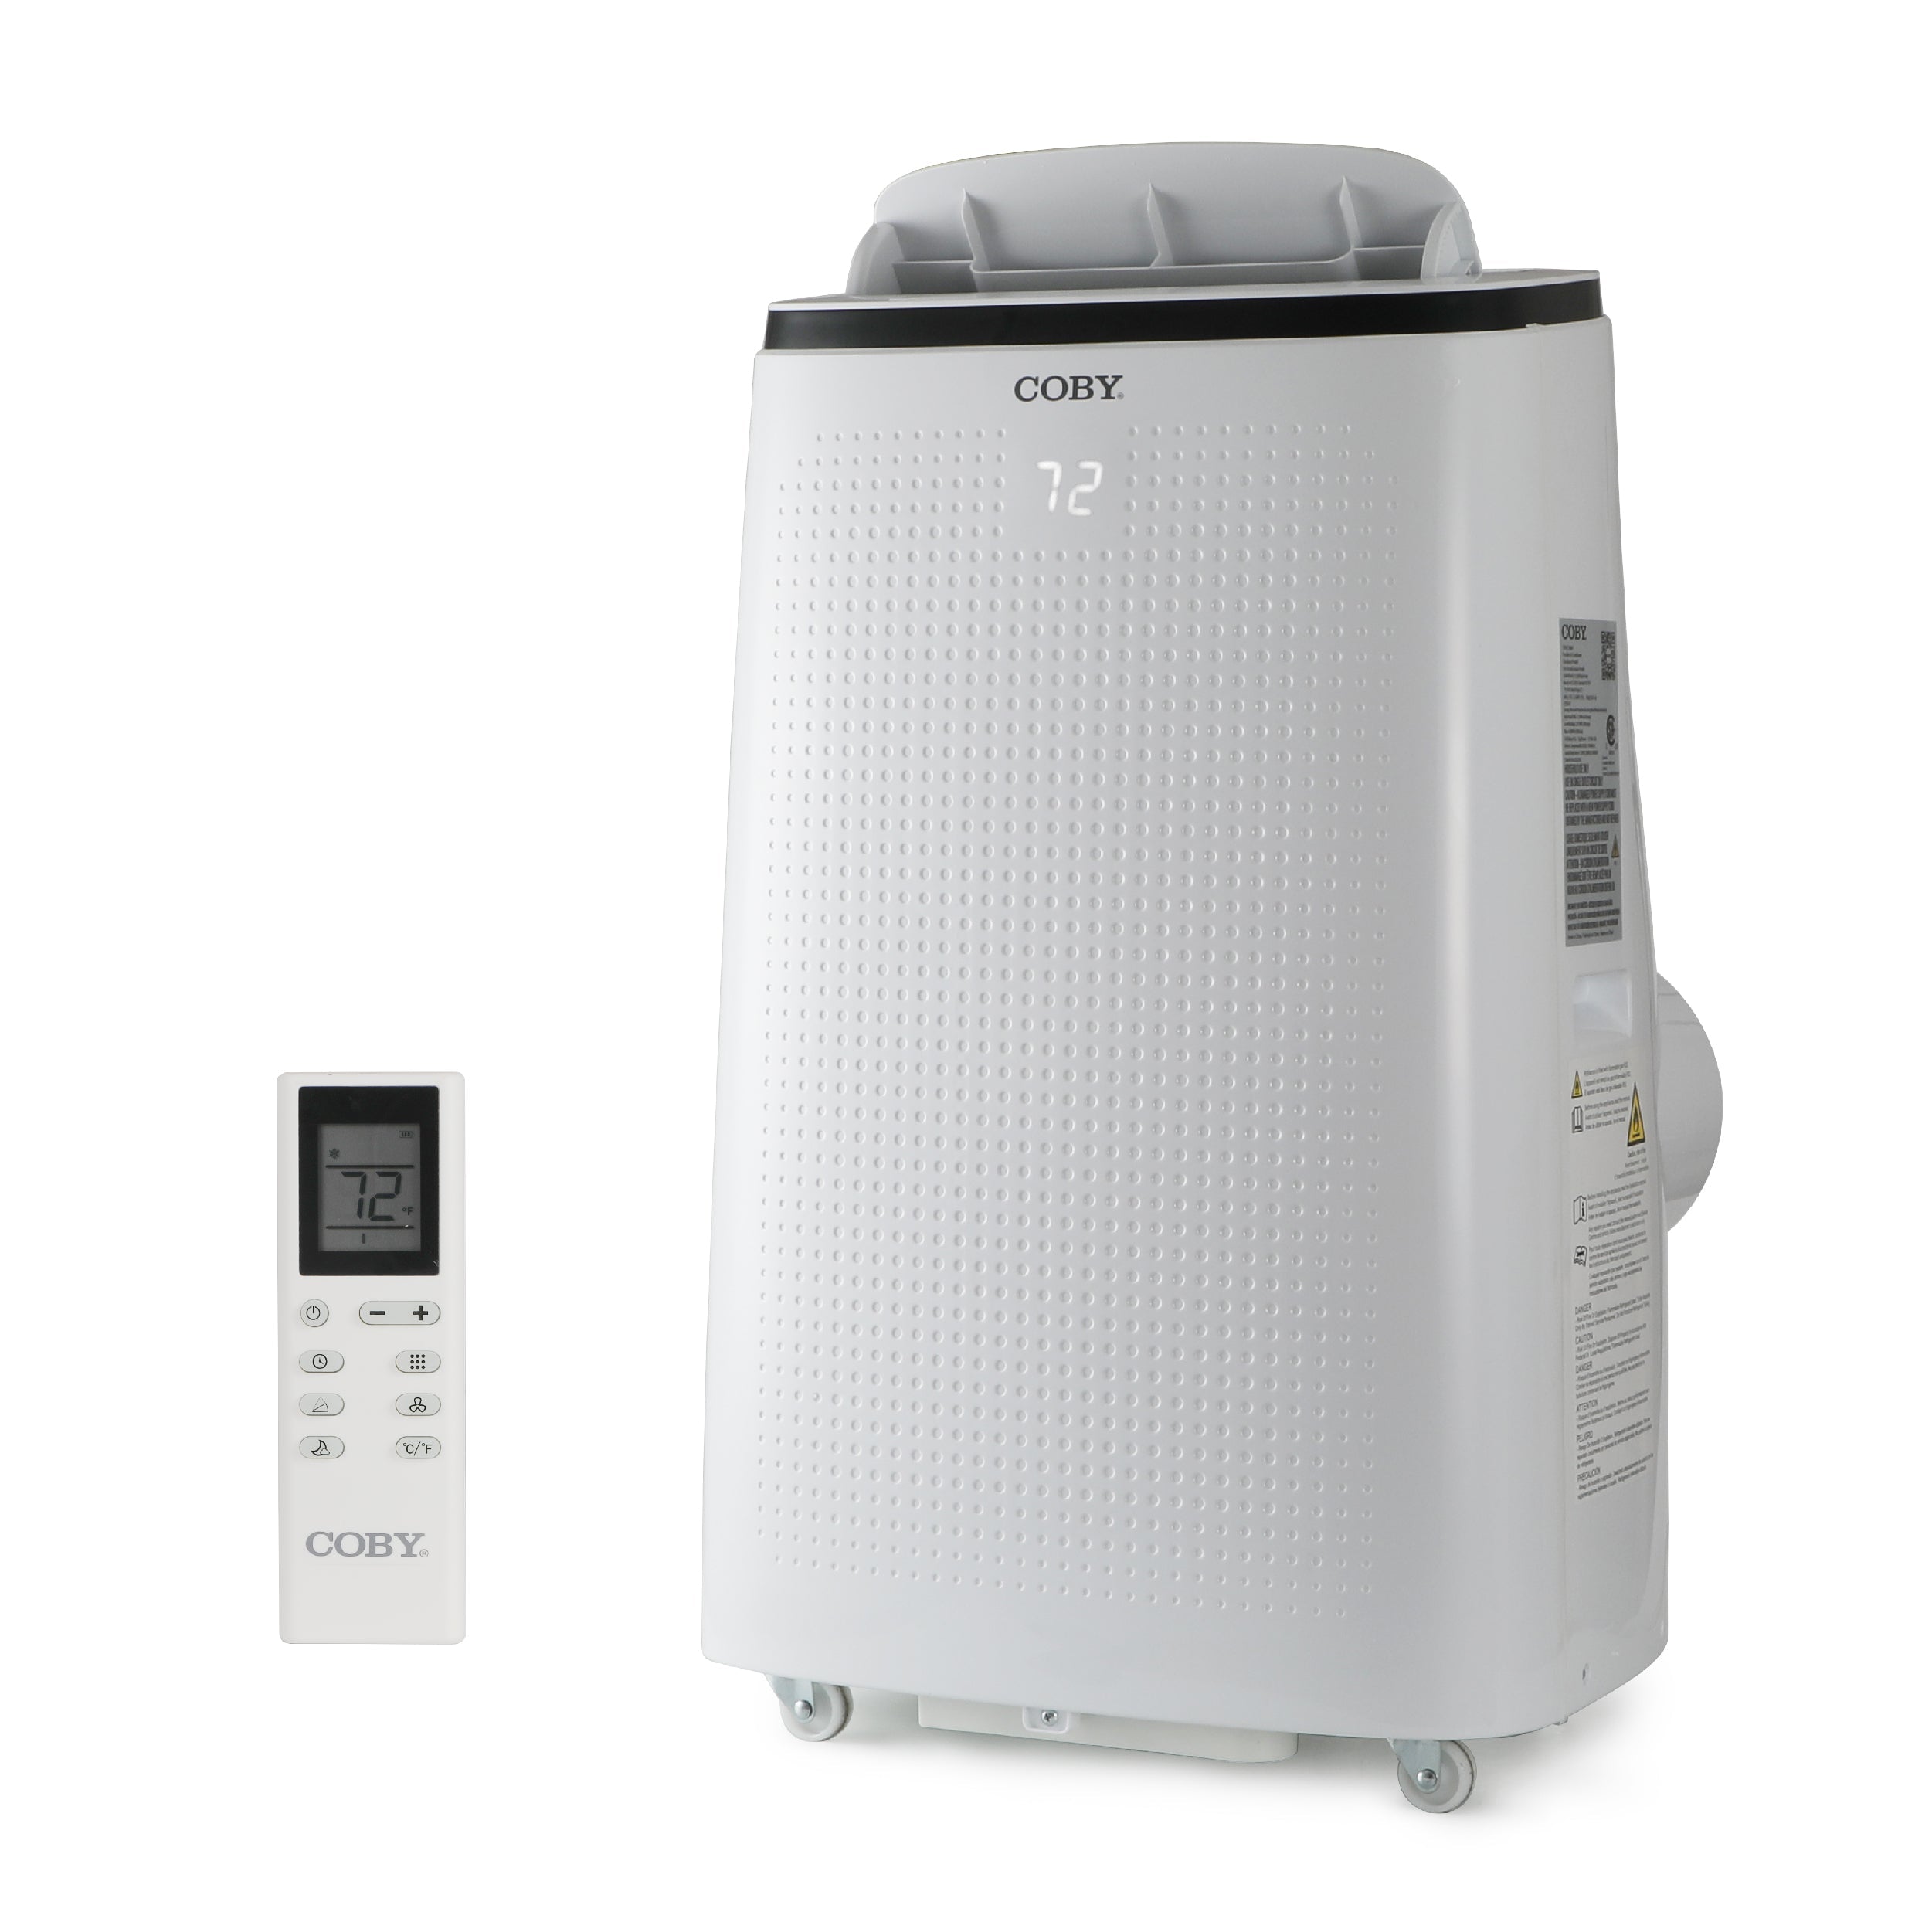 COBY Portable Air Conditioner 4-in-1 AC Unit, Heater, Dehumidifier & Fan, Air Conditioner 15,000 BTU Portable AC Unit with Remote Control for Rooms up to 775 Sq. Ft., 24-Hour Timer, & Installation Kit